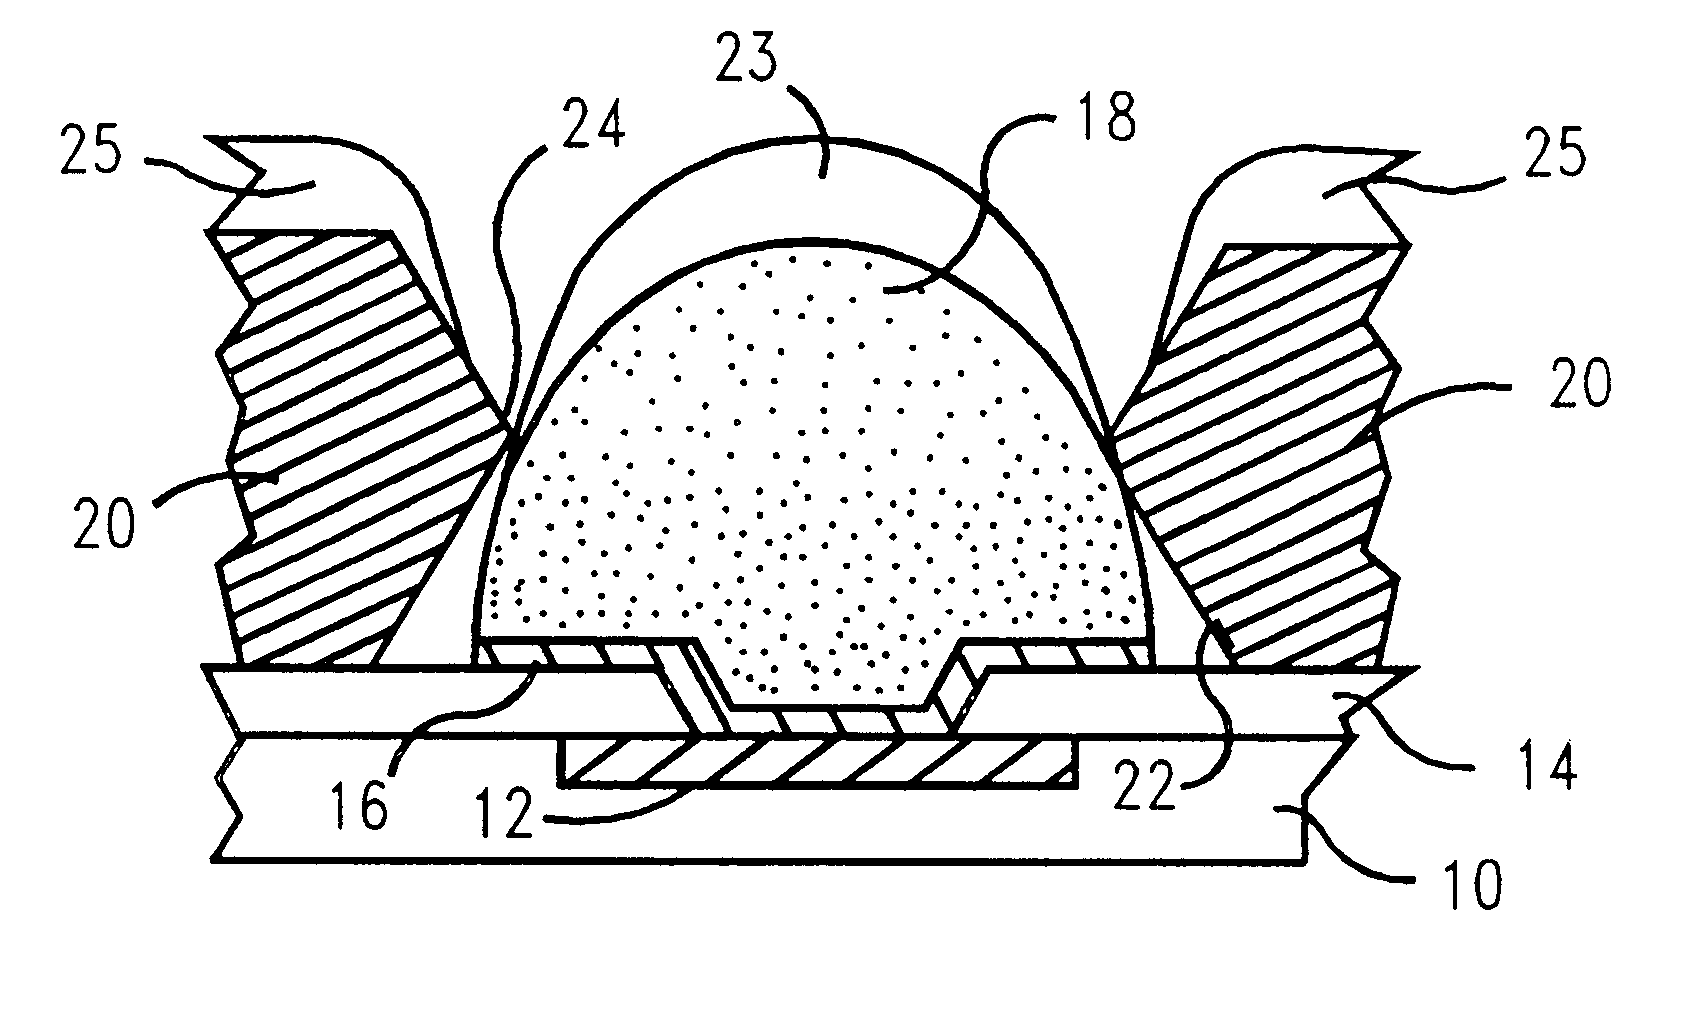 Method for forming reflowed solder ball with low melting point metal cap